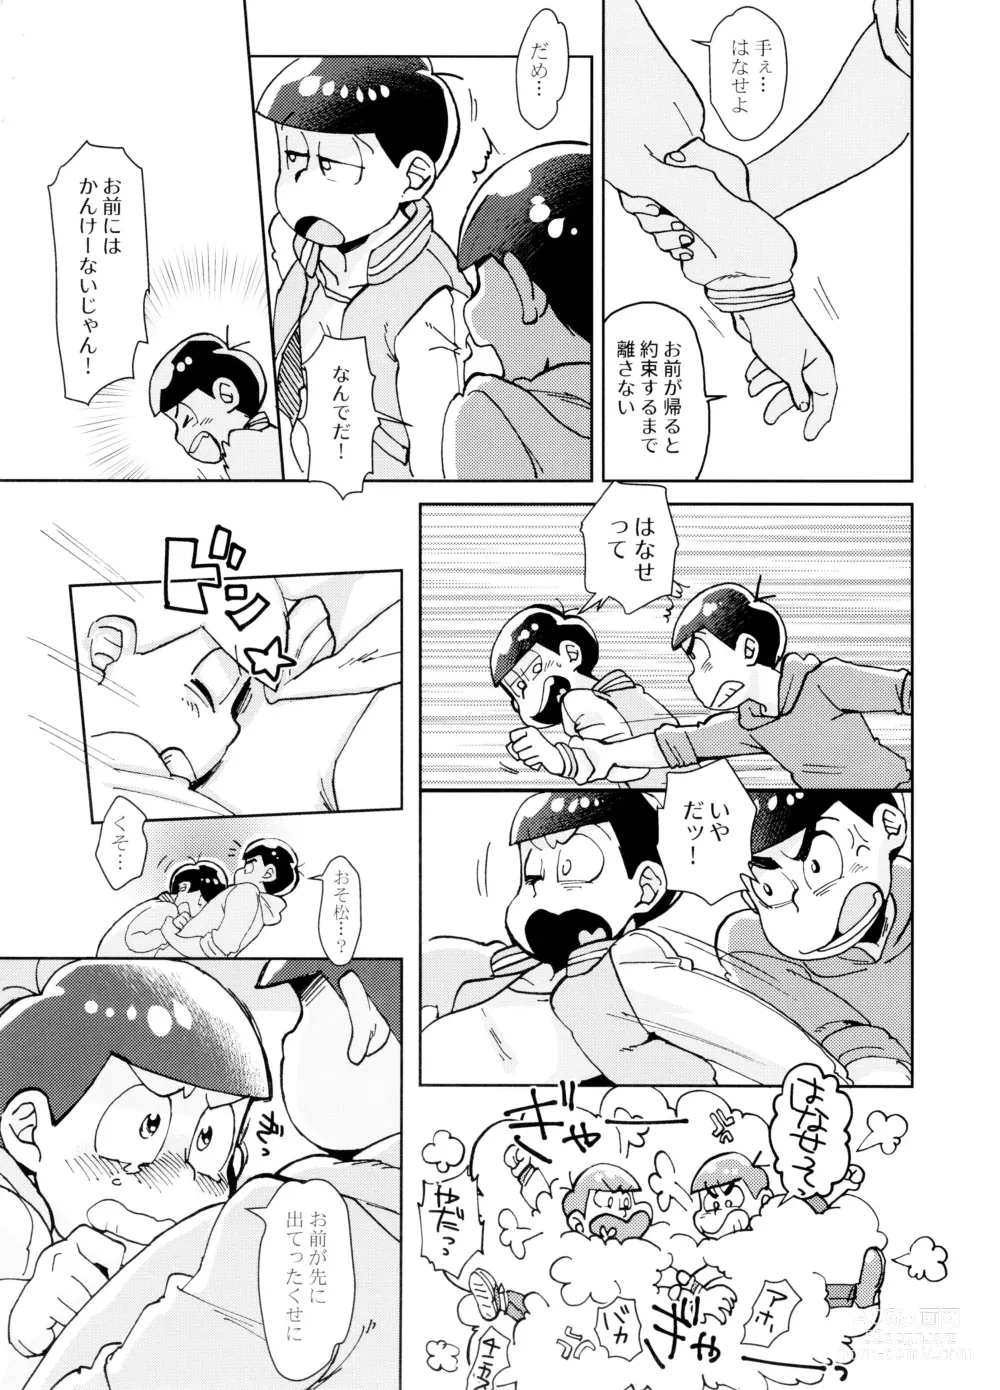 Page 19 of doujinshi Easy and Blue